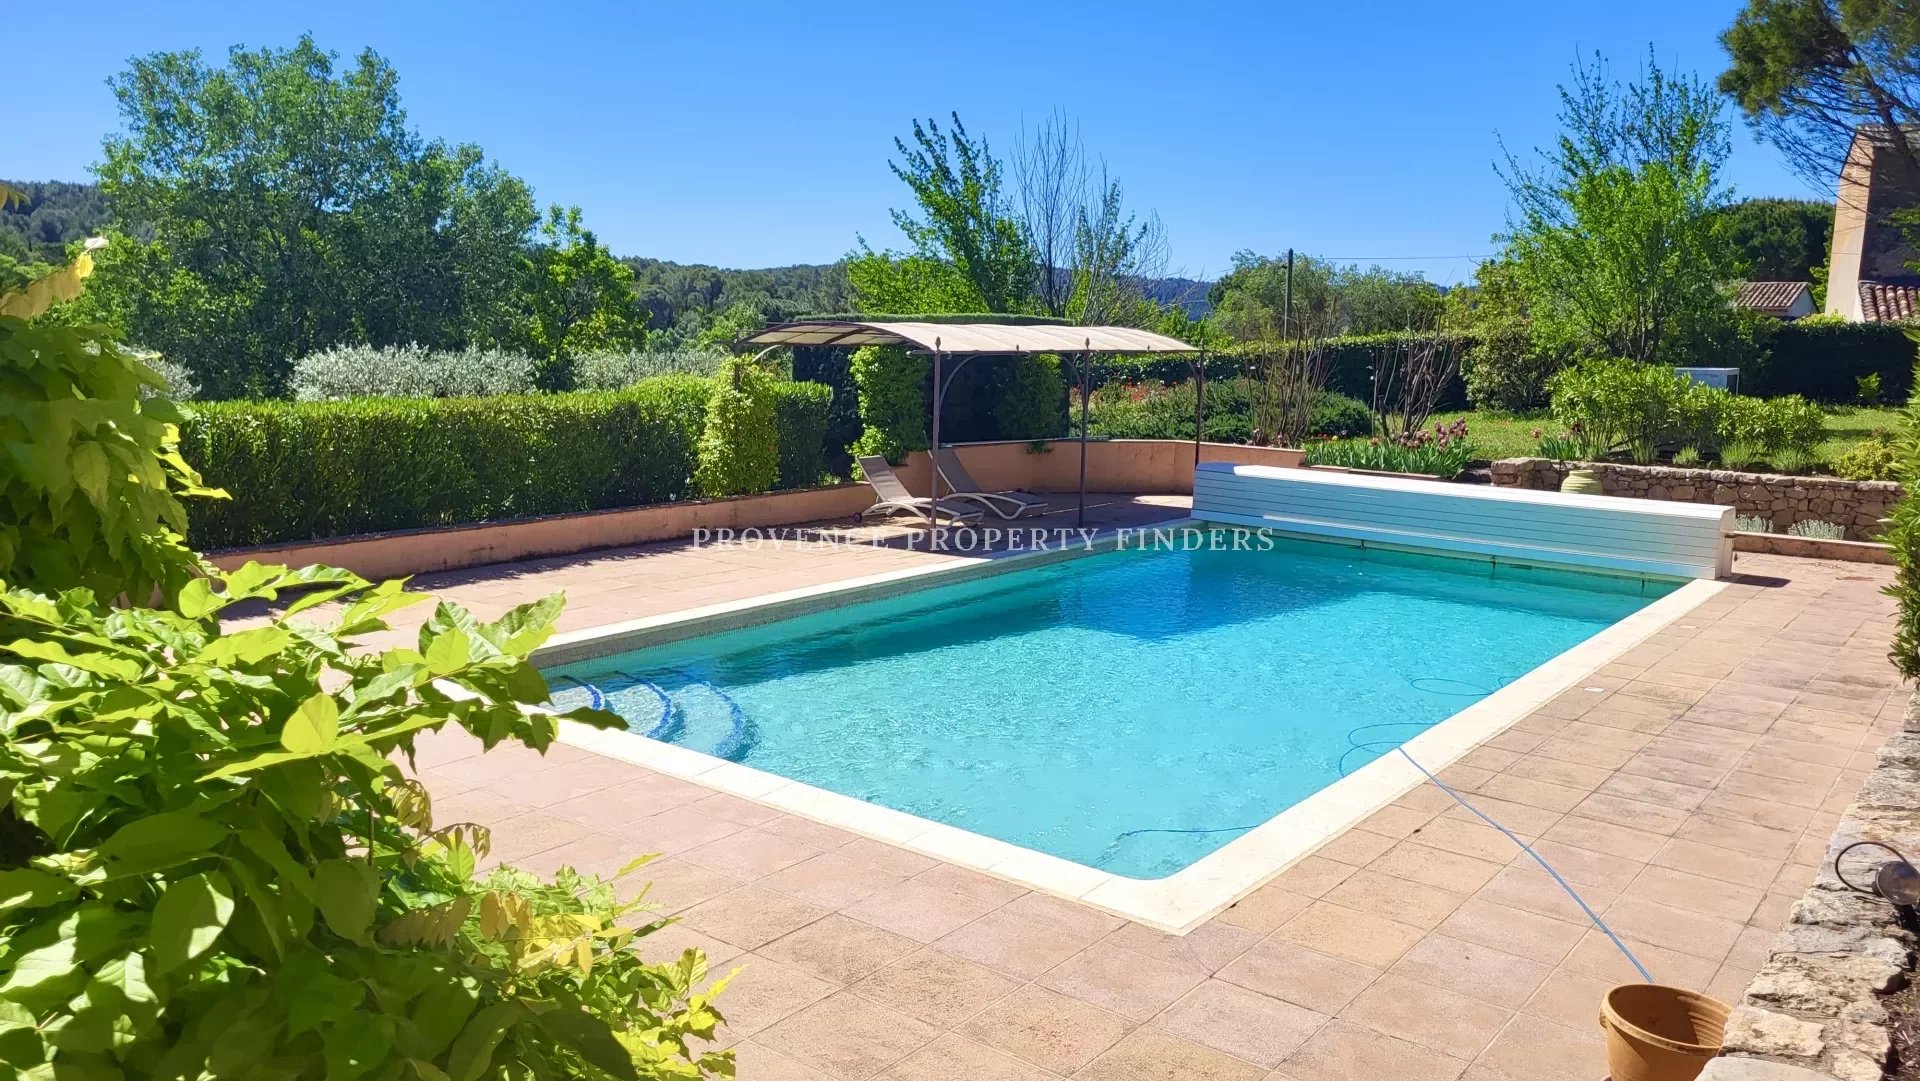 Exclusivity, Villa, 4 bedrooms, heated pool, 5 minute walk from the village.